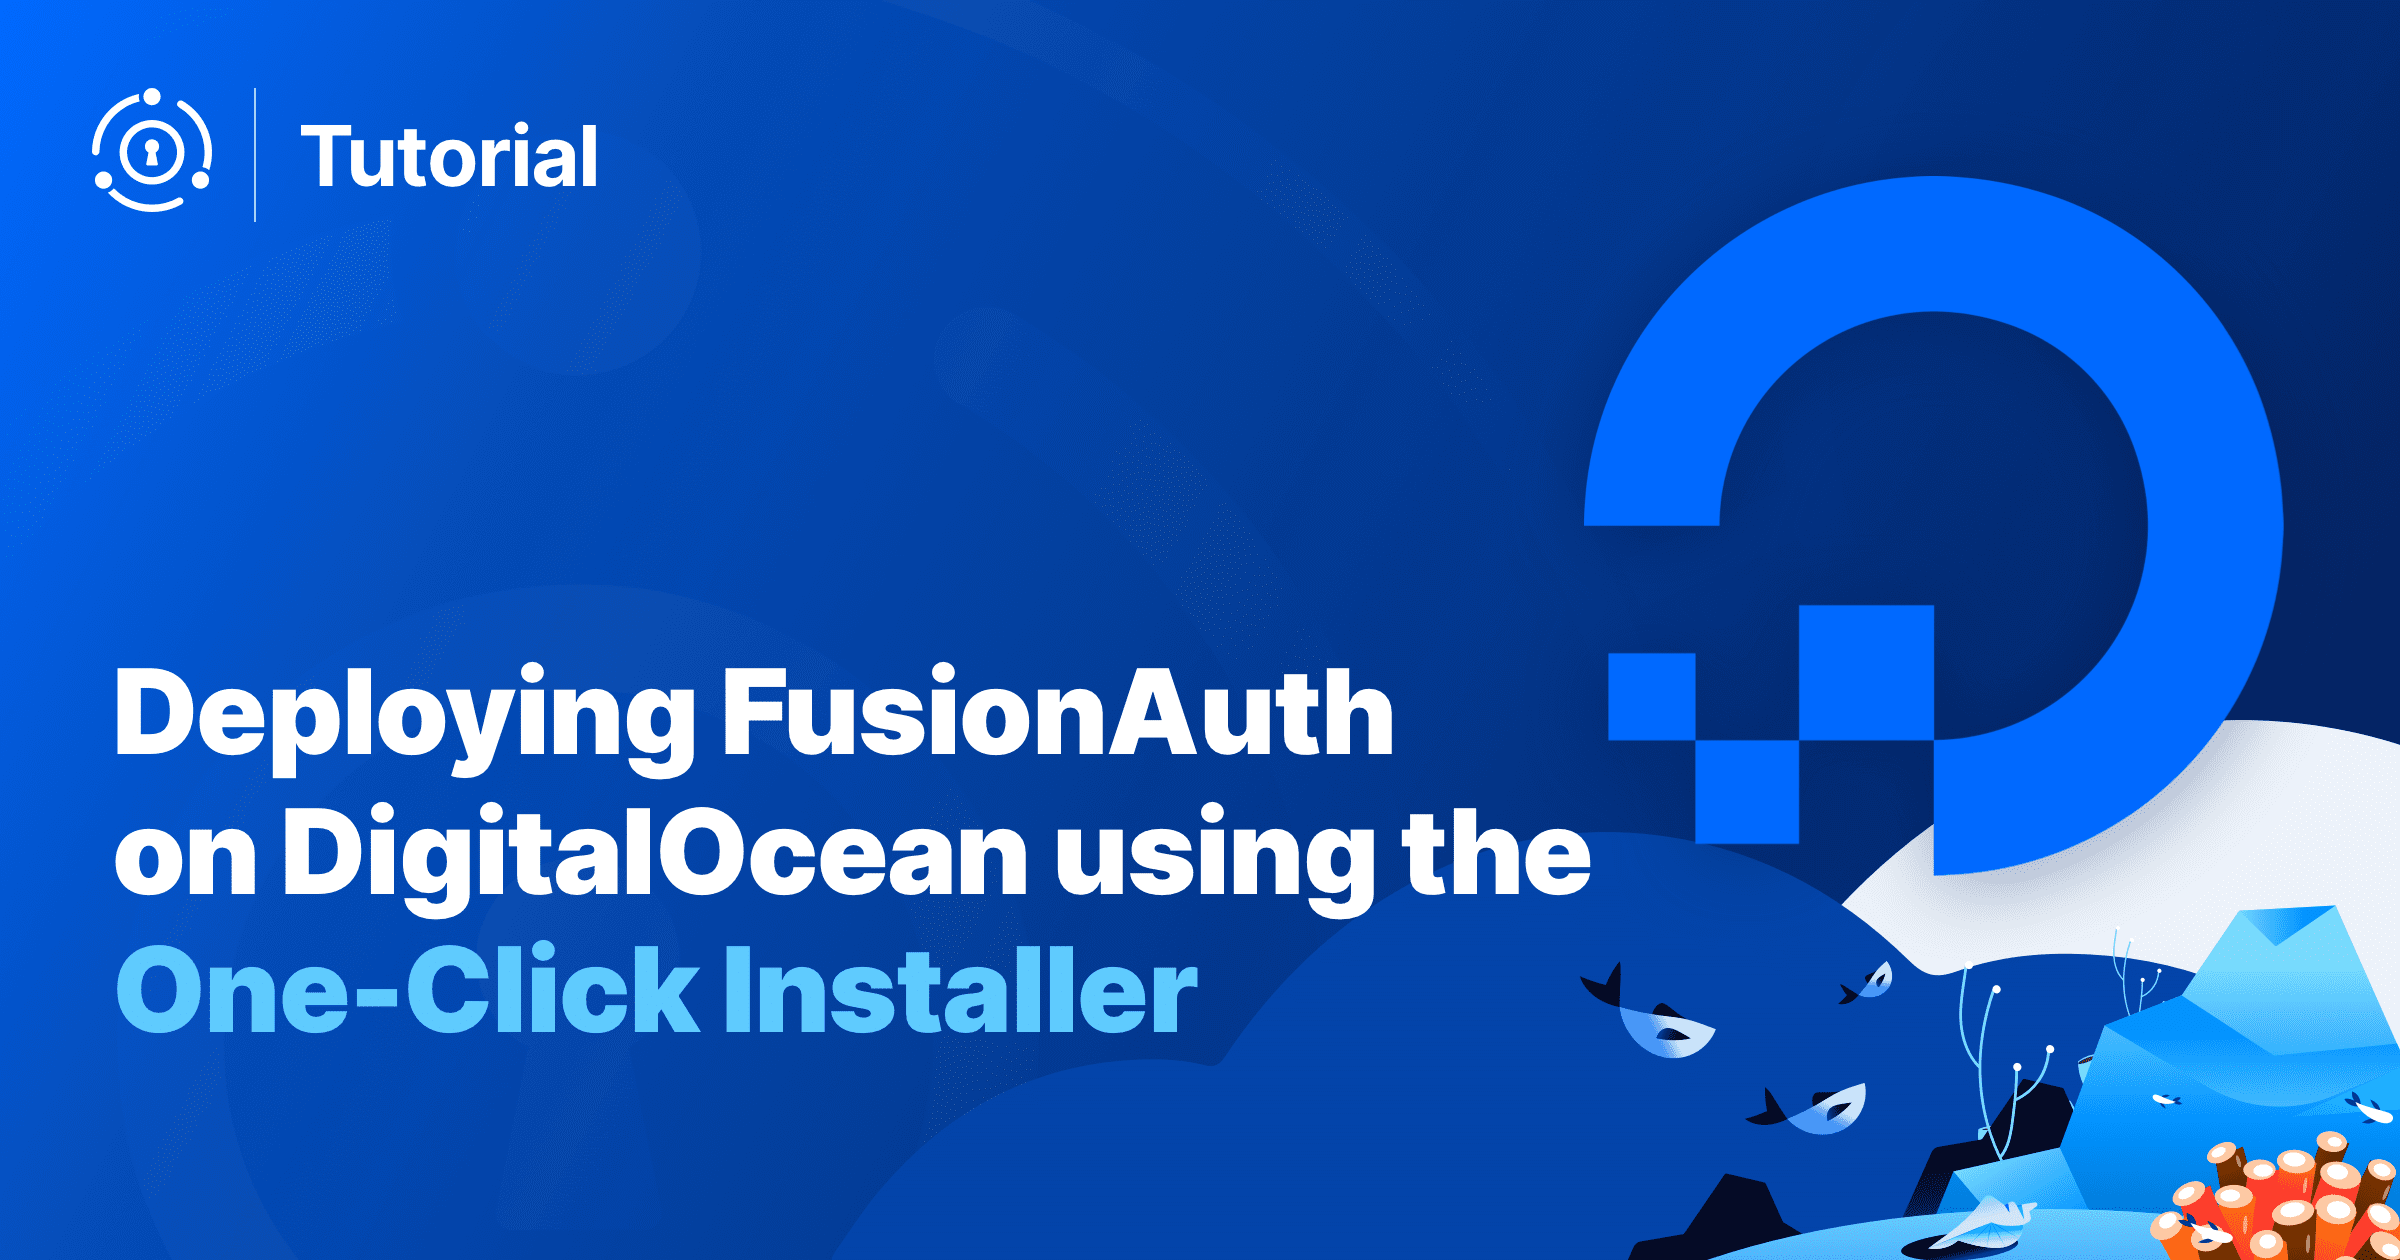 Deploying FusionAuth on DigitalOcean using the One-Click Installer